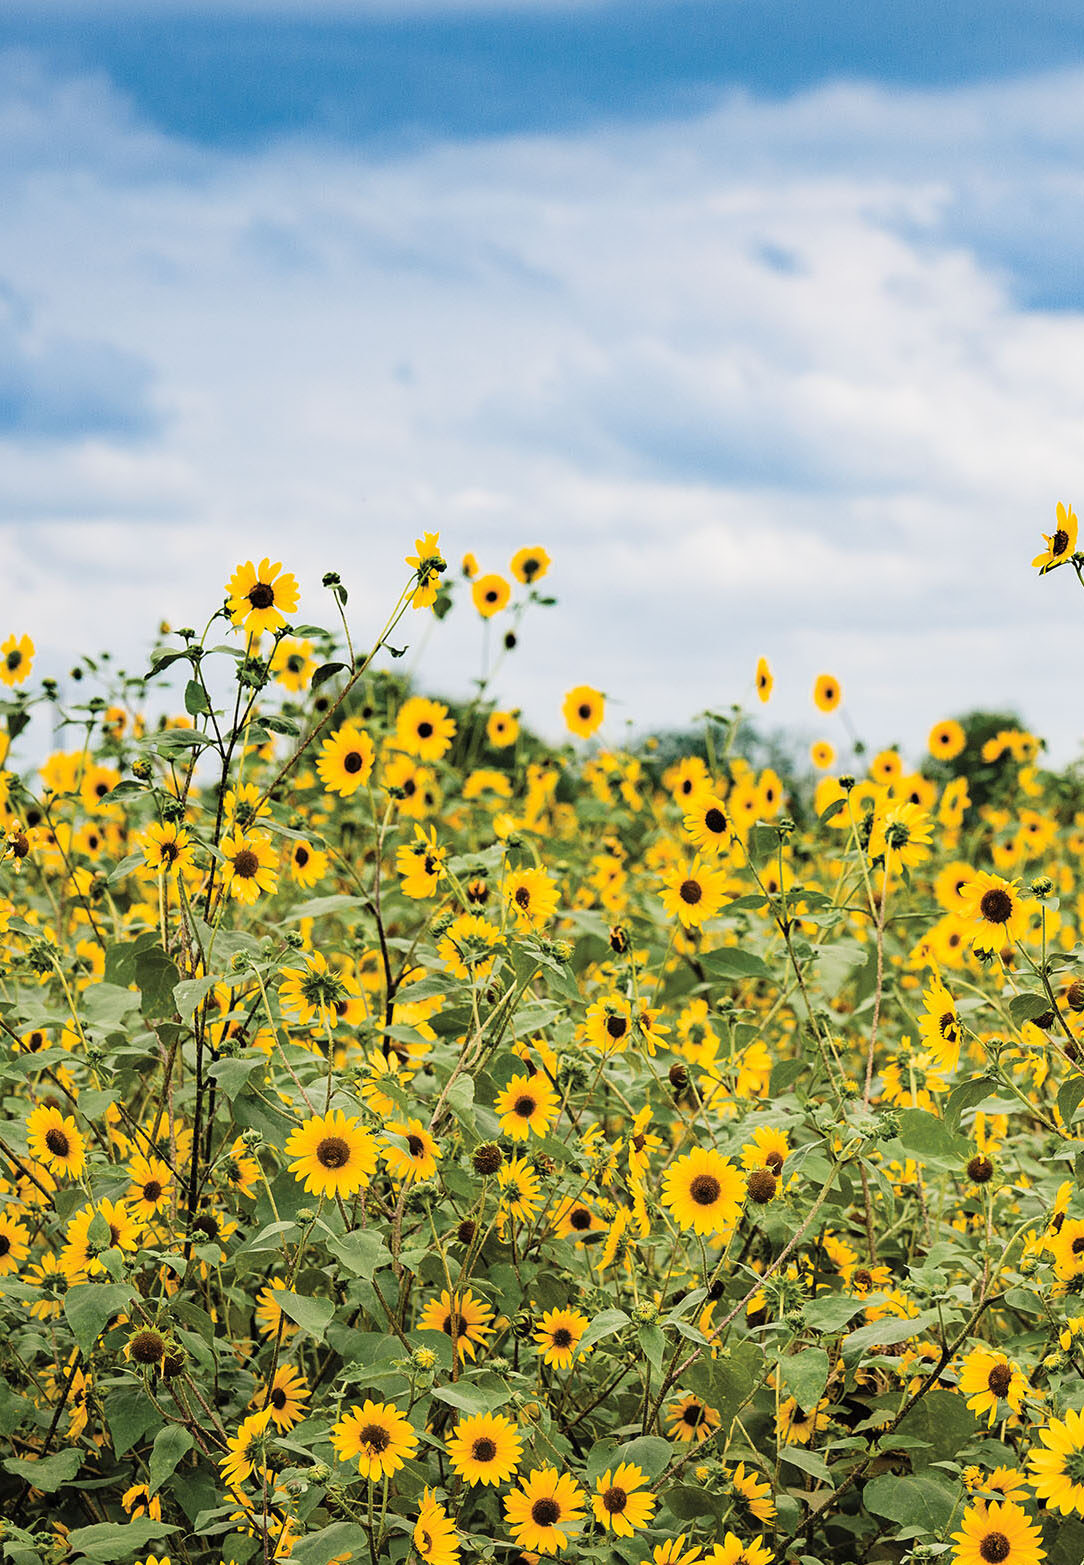 Bright yellow sunflowers in a field under a cloudy blue sky